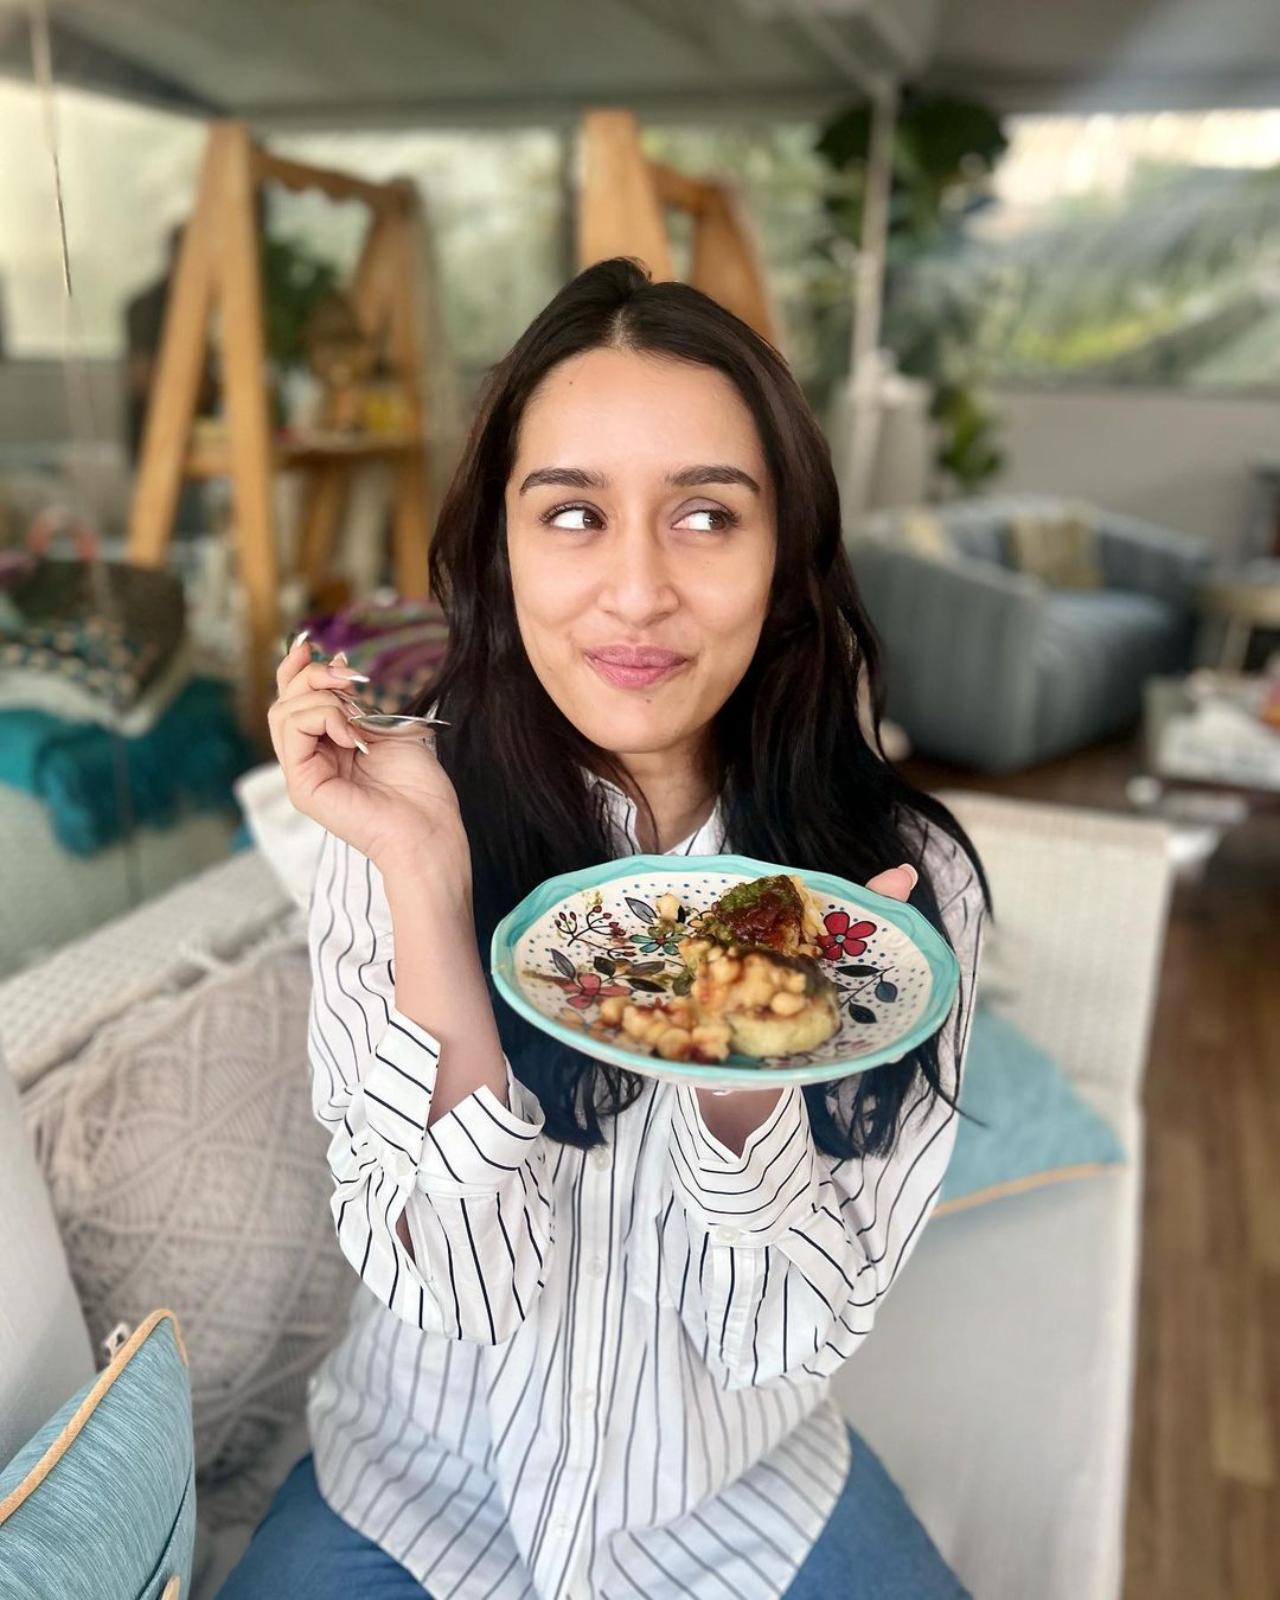 Shraddha Kapoor has time and again shared glimpses of her quality time with her family on social media. The actress always has a goofy post or video after family outing, which she shares with her fans too